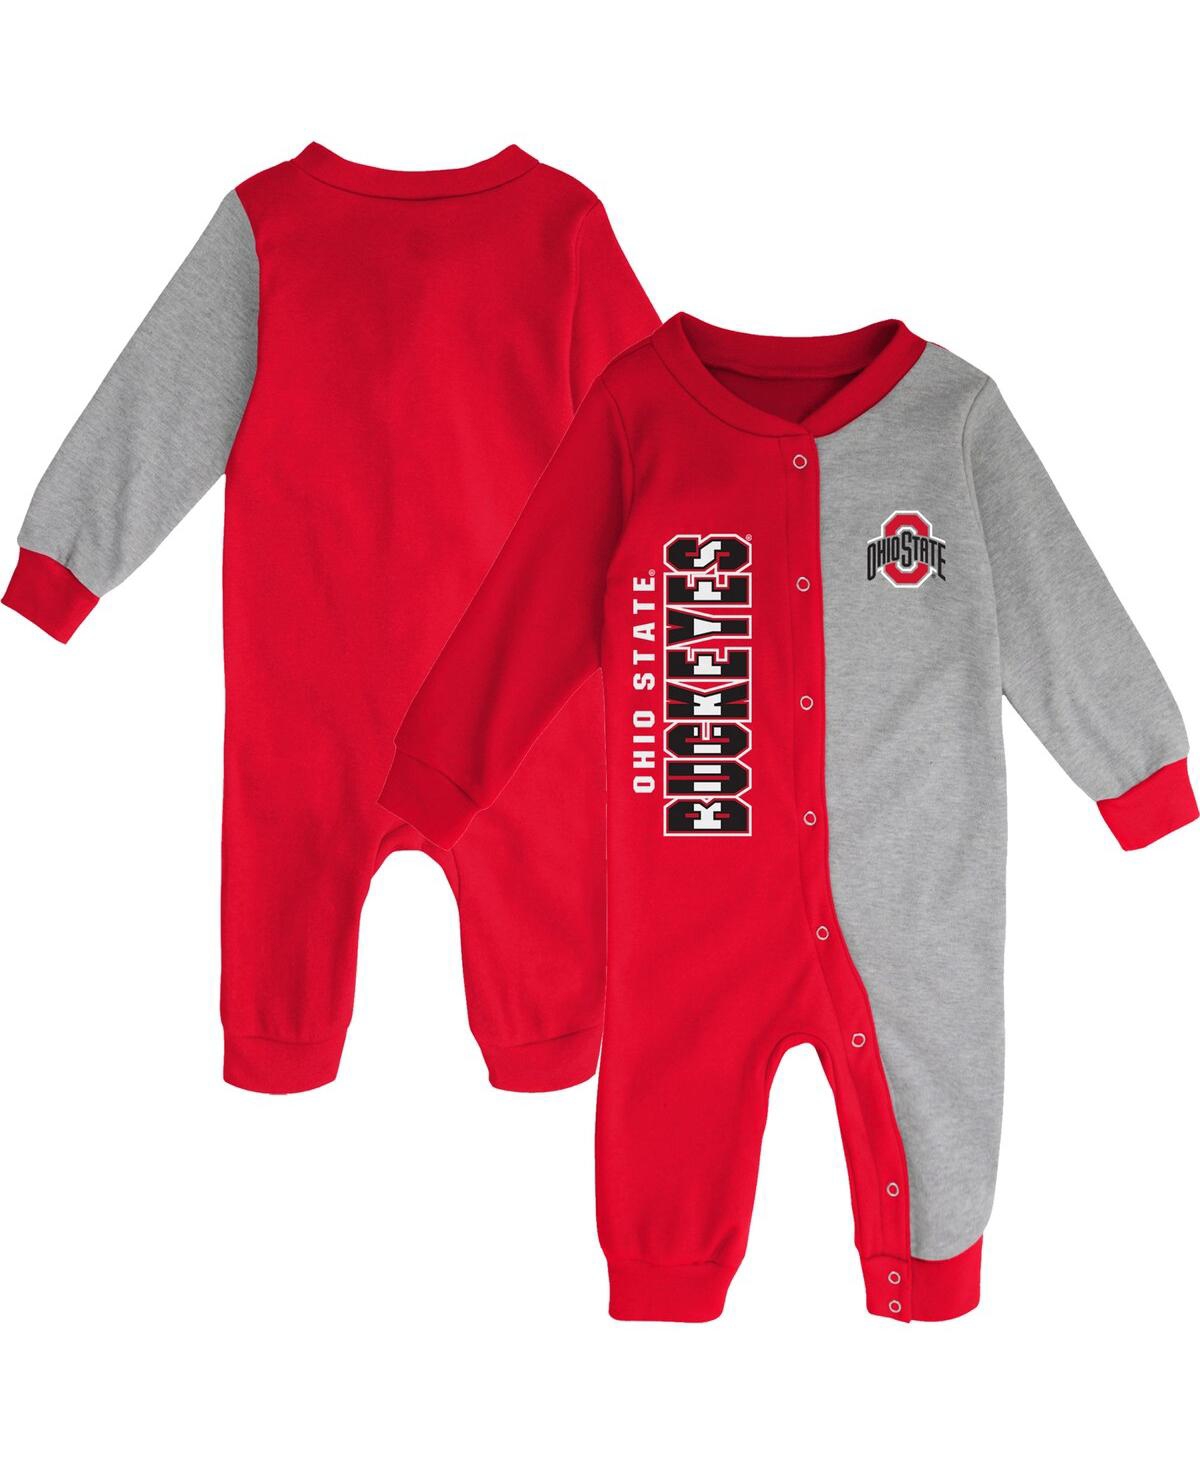 Shop Outerstuff Infant Boys And Girls Scarlet, Heather Gray Ohio State Buckeyes Halftime Two-tone Sleeper In Scarlet,heather Gray